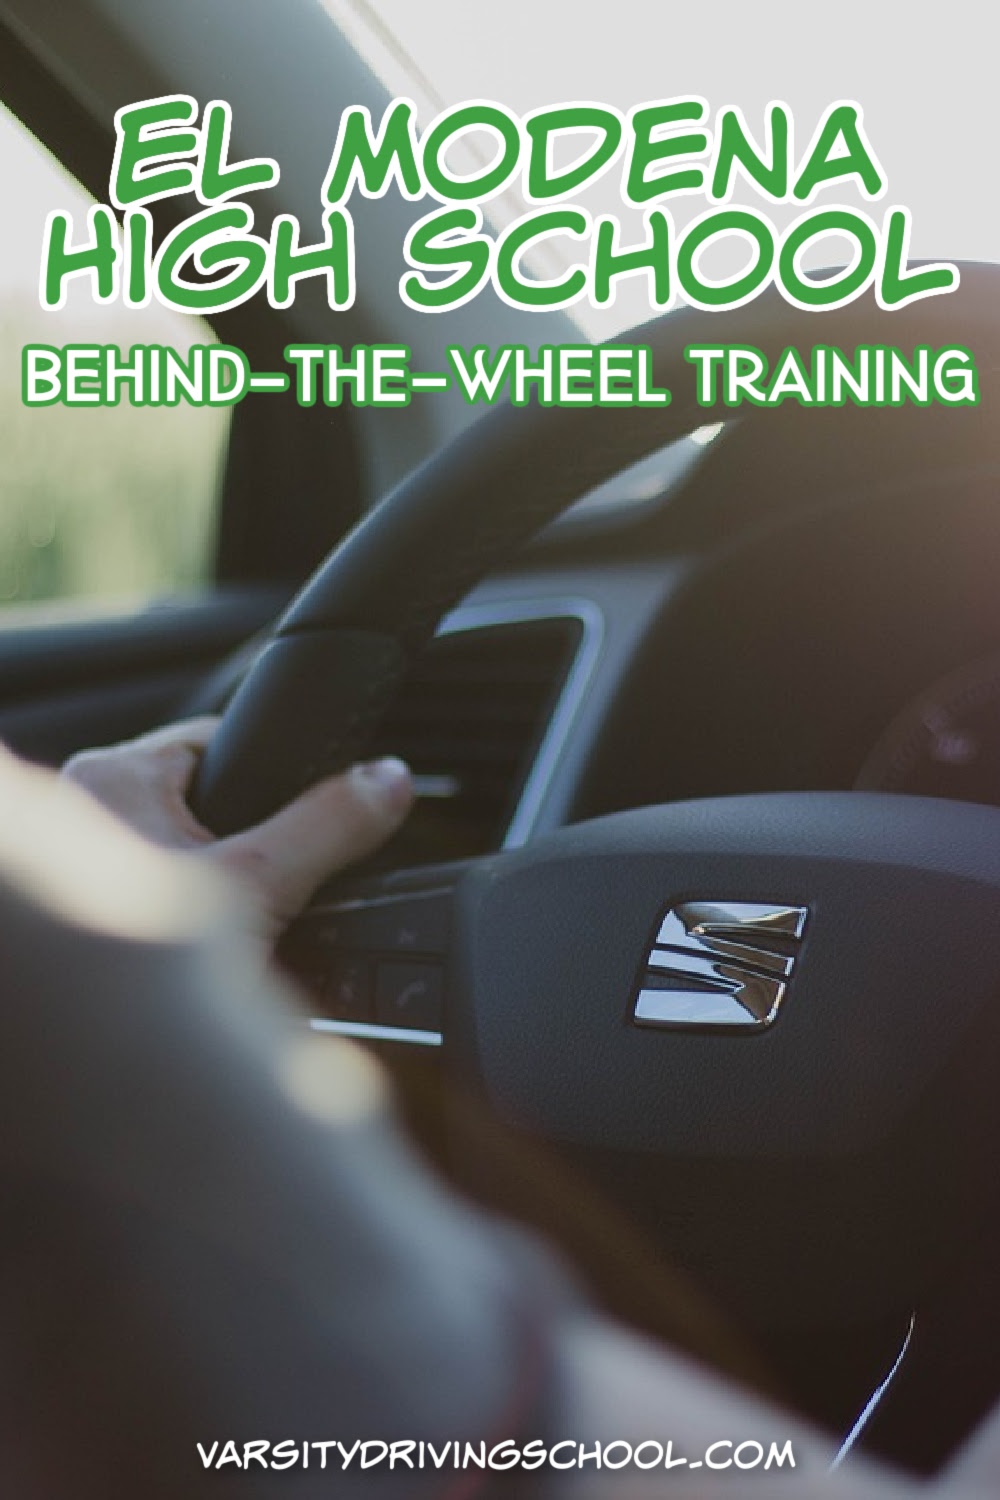 The best El Modena High School behind the wheel training comes from the certified trainers at Varsity Driving School.